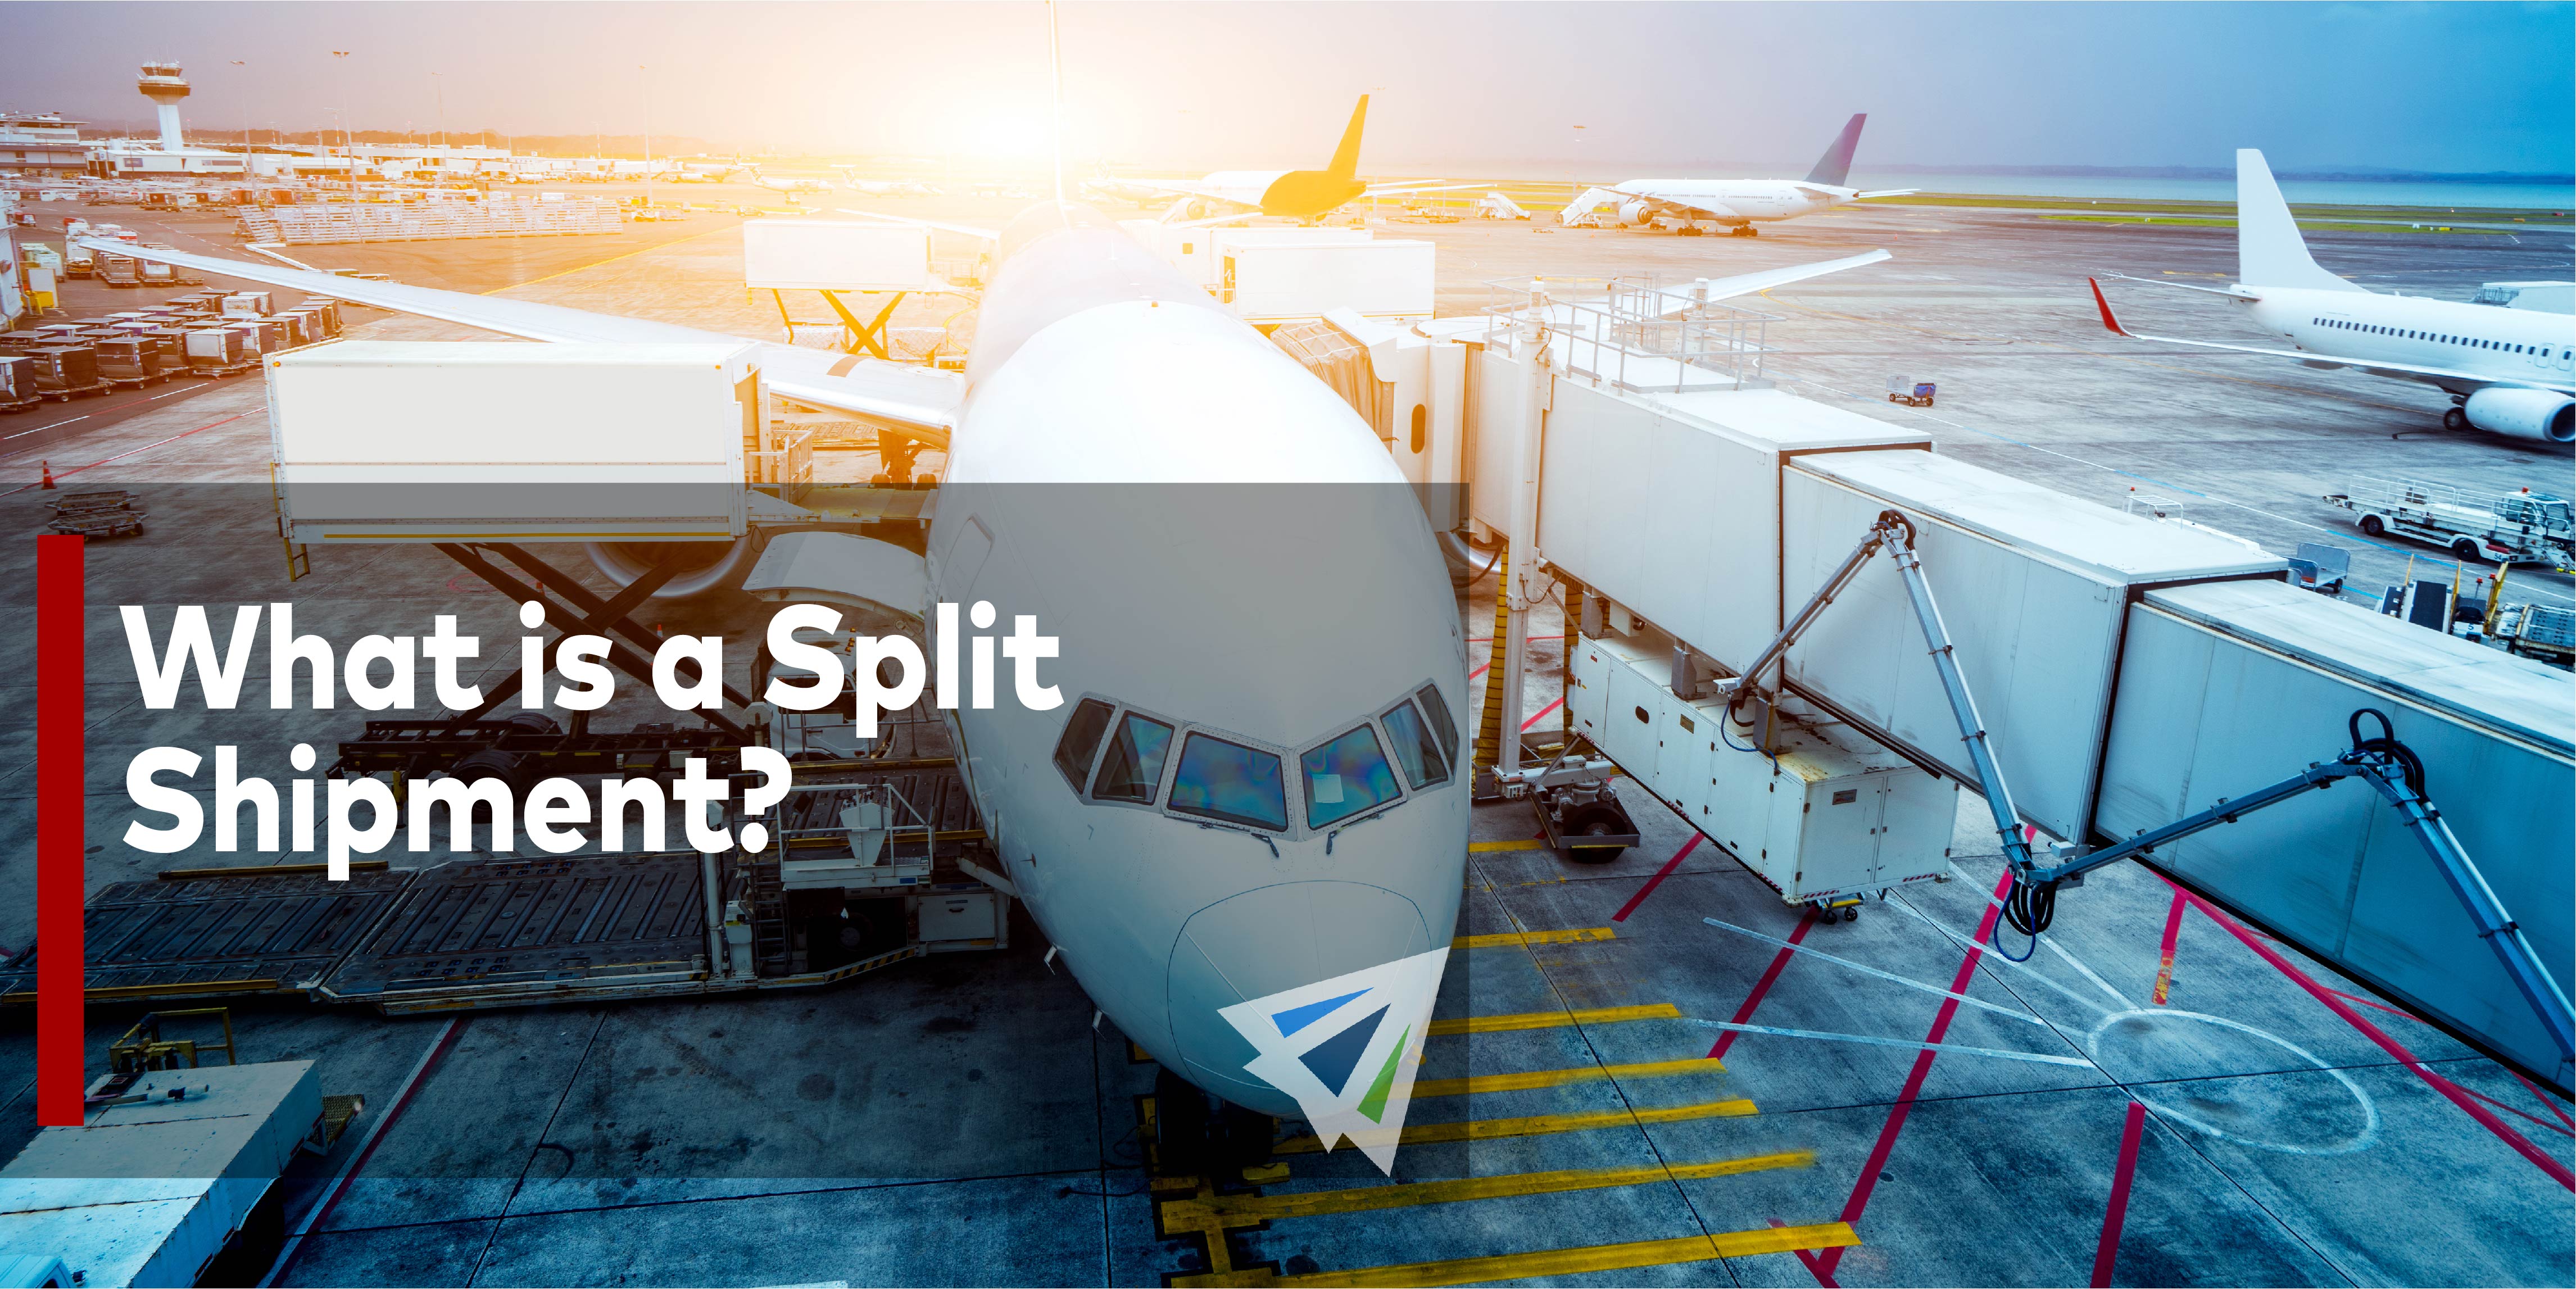 What is a Split Shipment?